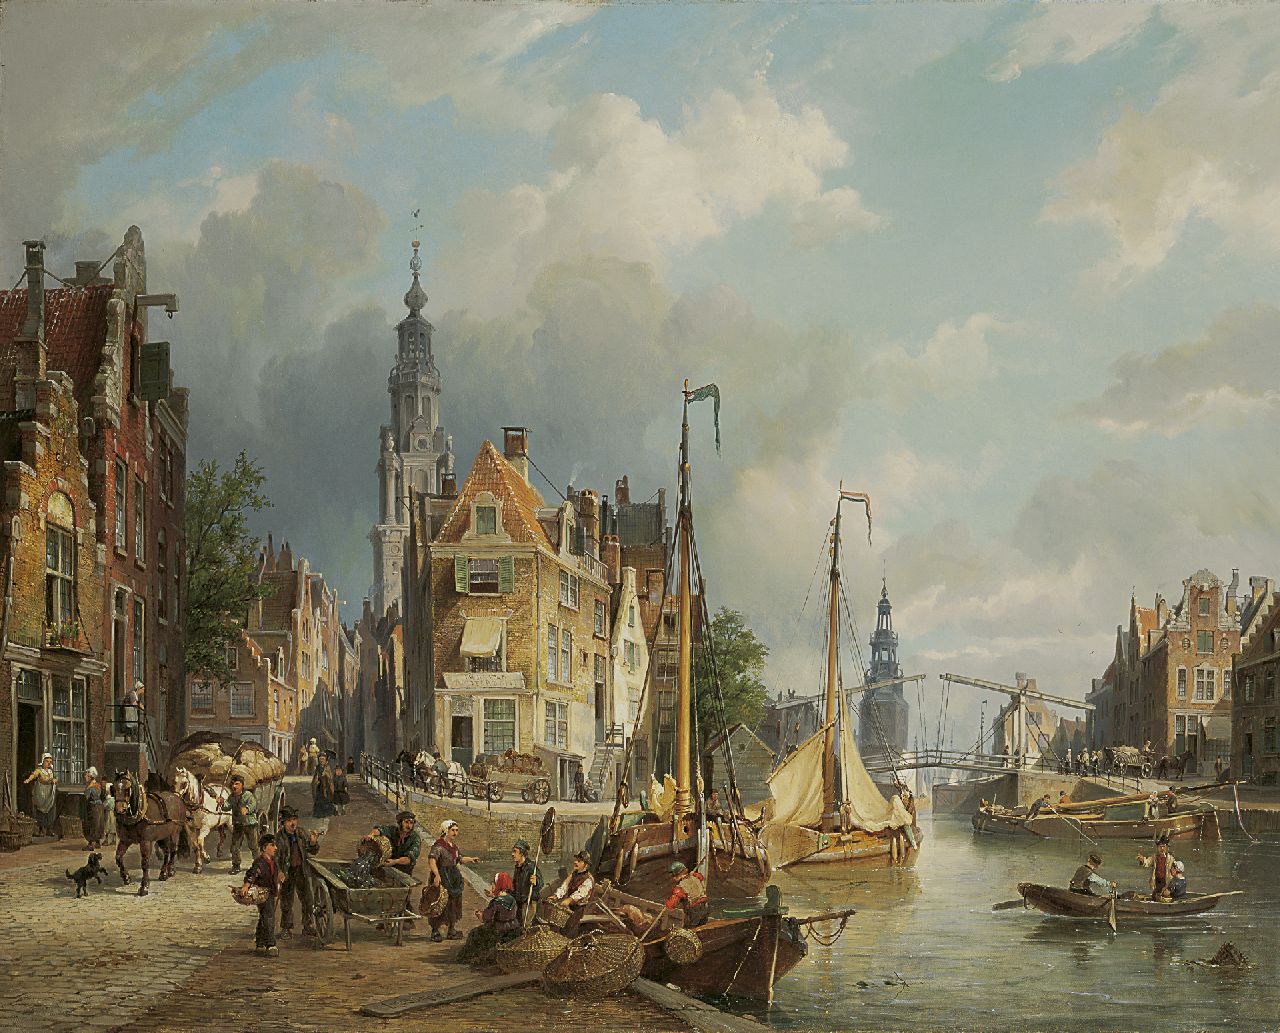 Dommelshuizen C.C.  | Cornelis Christiaan Dommelshuizen, The Zwanenburgwal with the Montelbaanstoren in the distance, Amsterdam, Öl auf Leinwand 61,6 x 76,5 cm, signed l.c. and with initials on the fish cart und dated 'Bruxelles 1873'